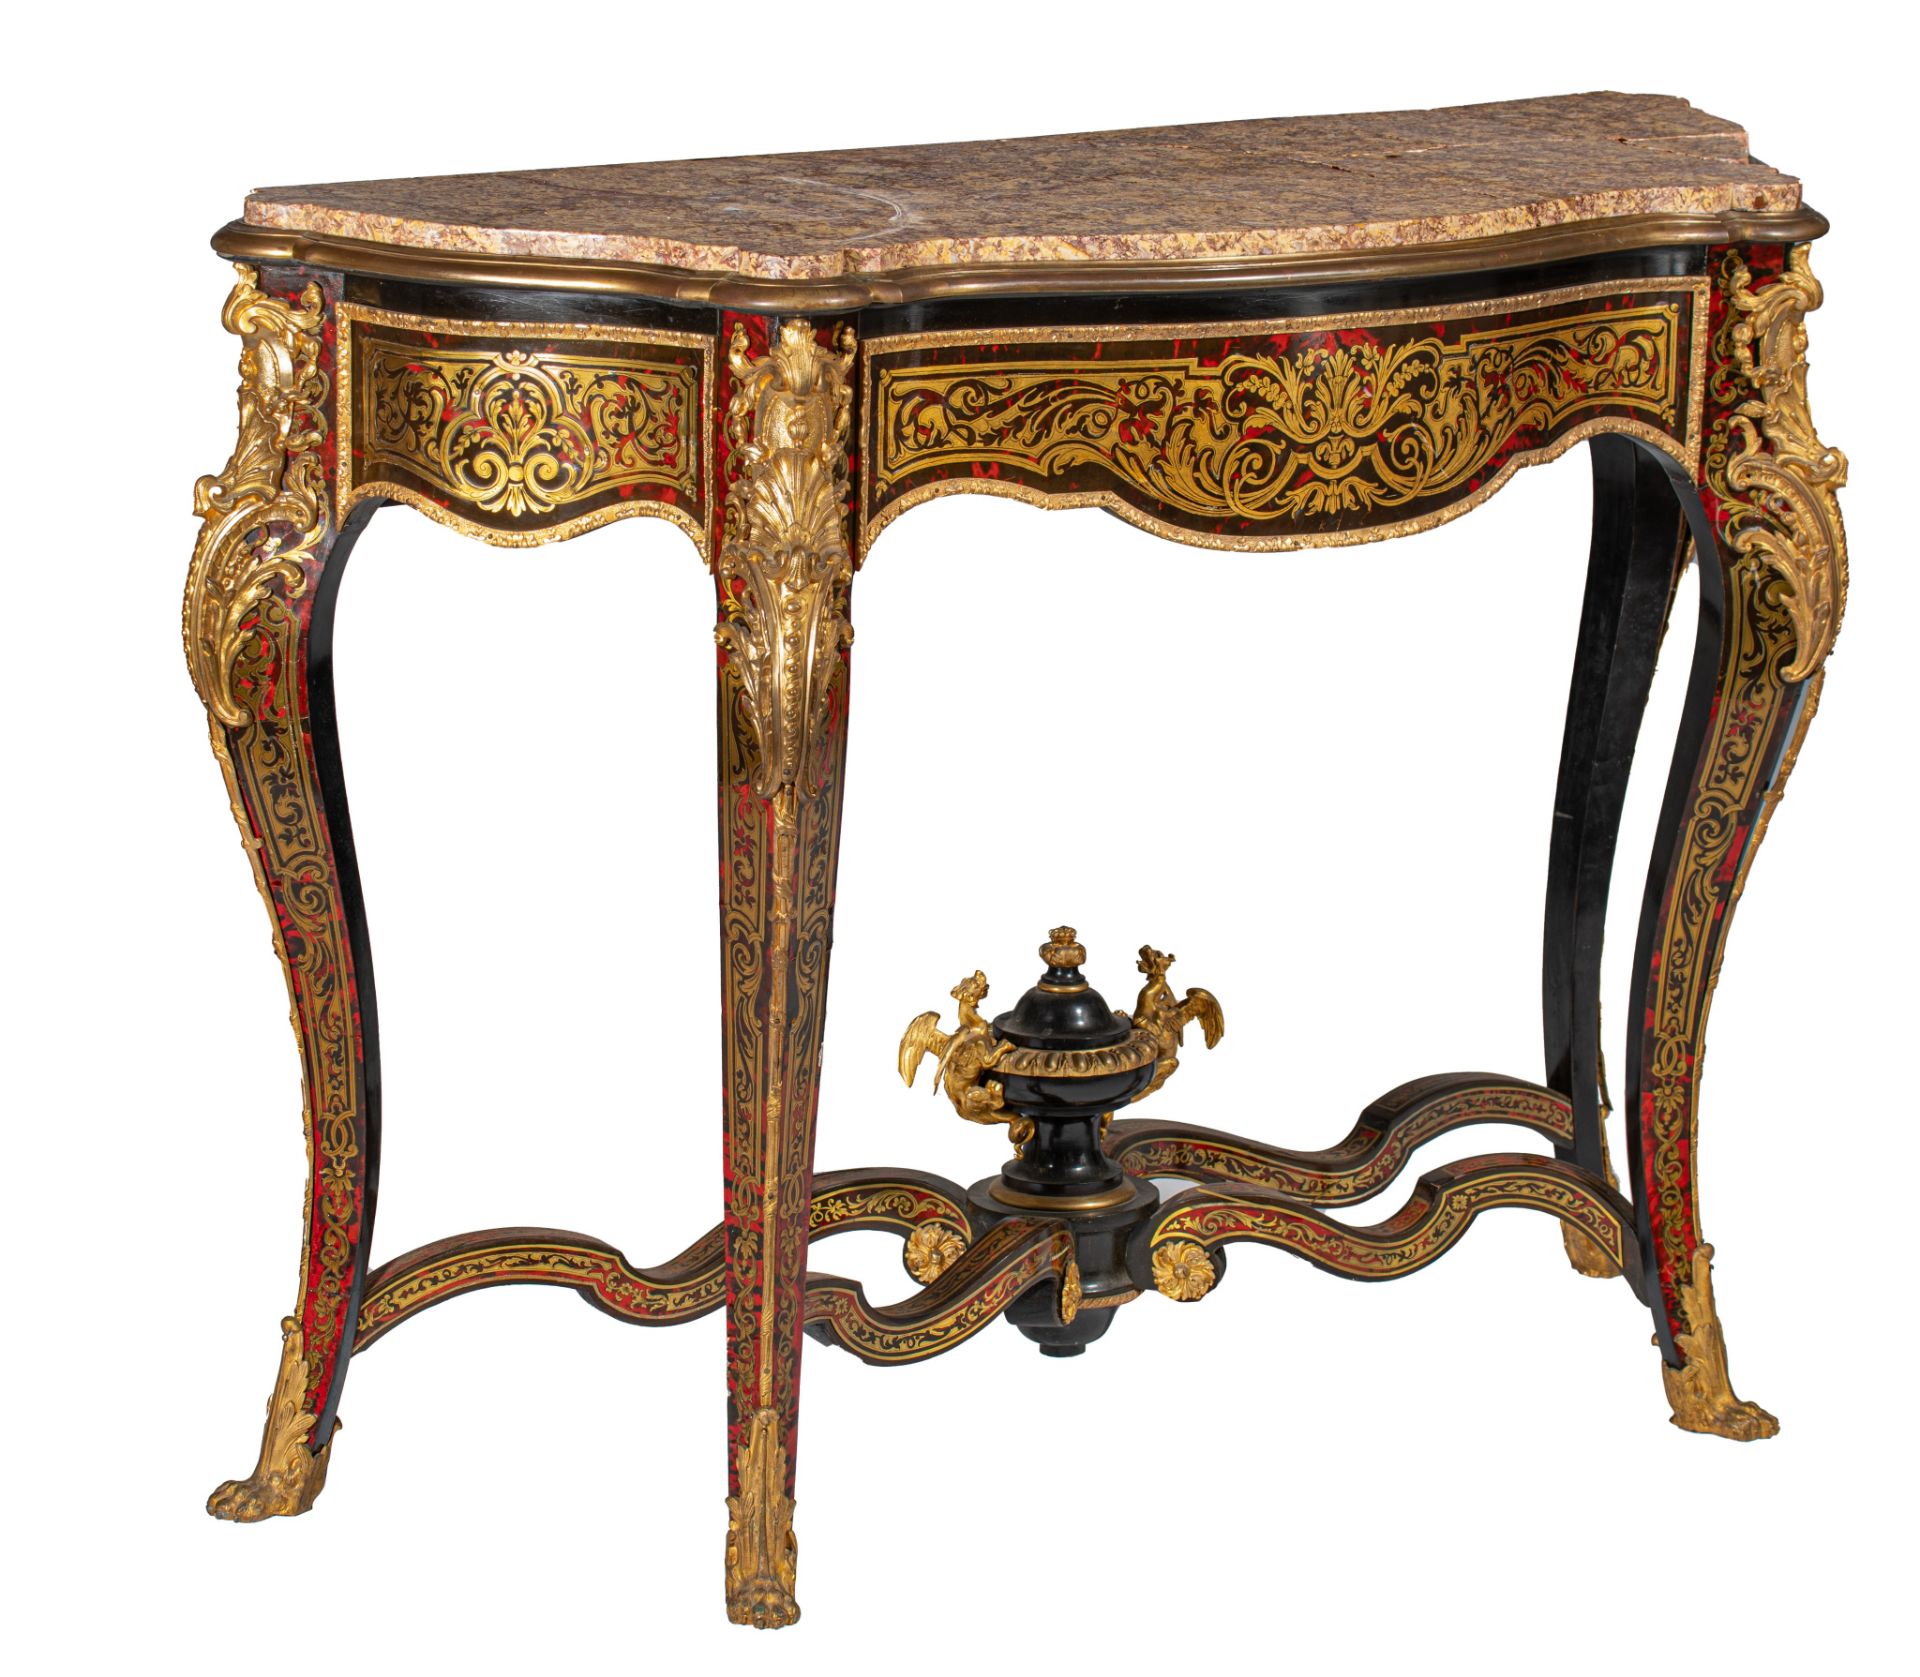 A Napoleon III Boulle work console table, with marble top, marked, H 95 - W 135 - D 50 cm